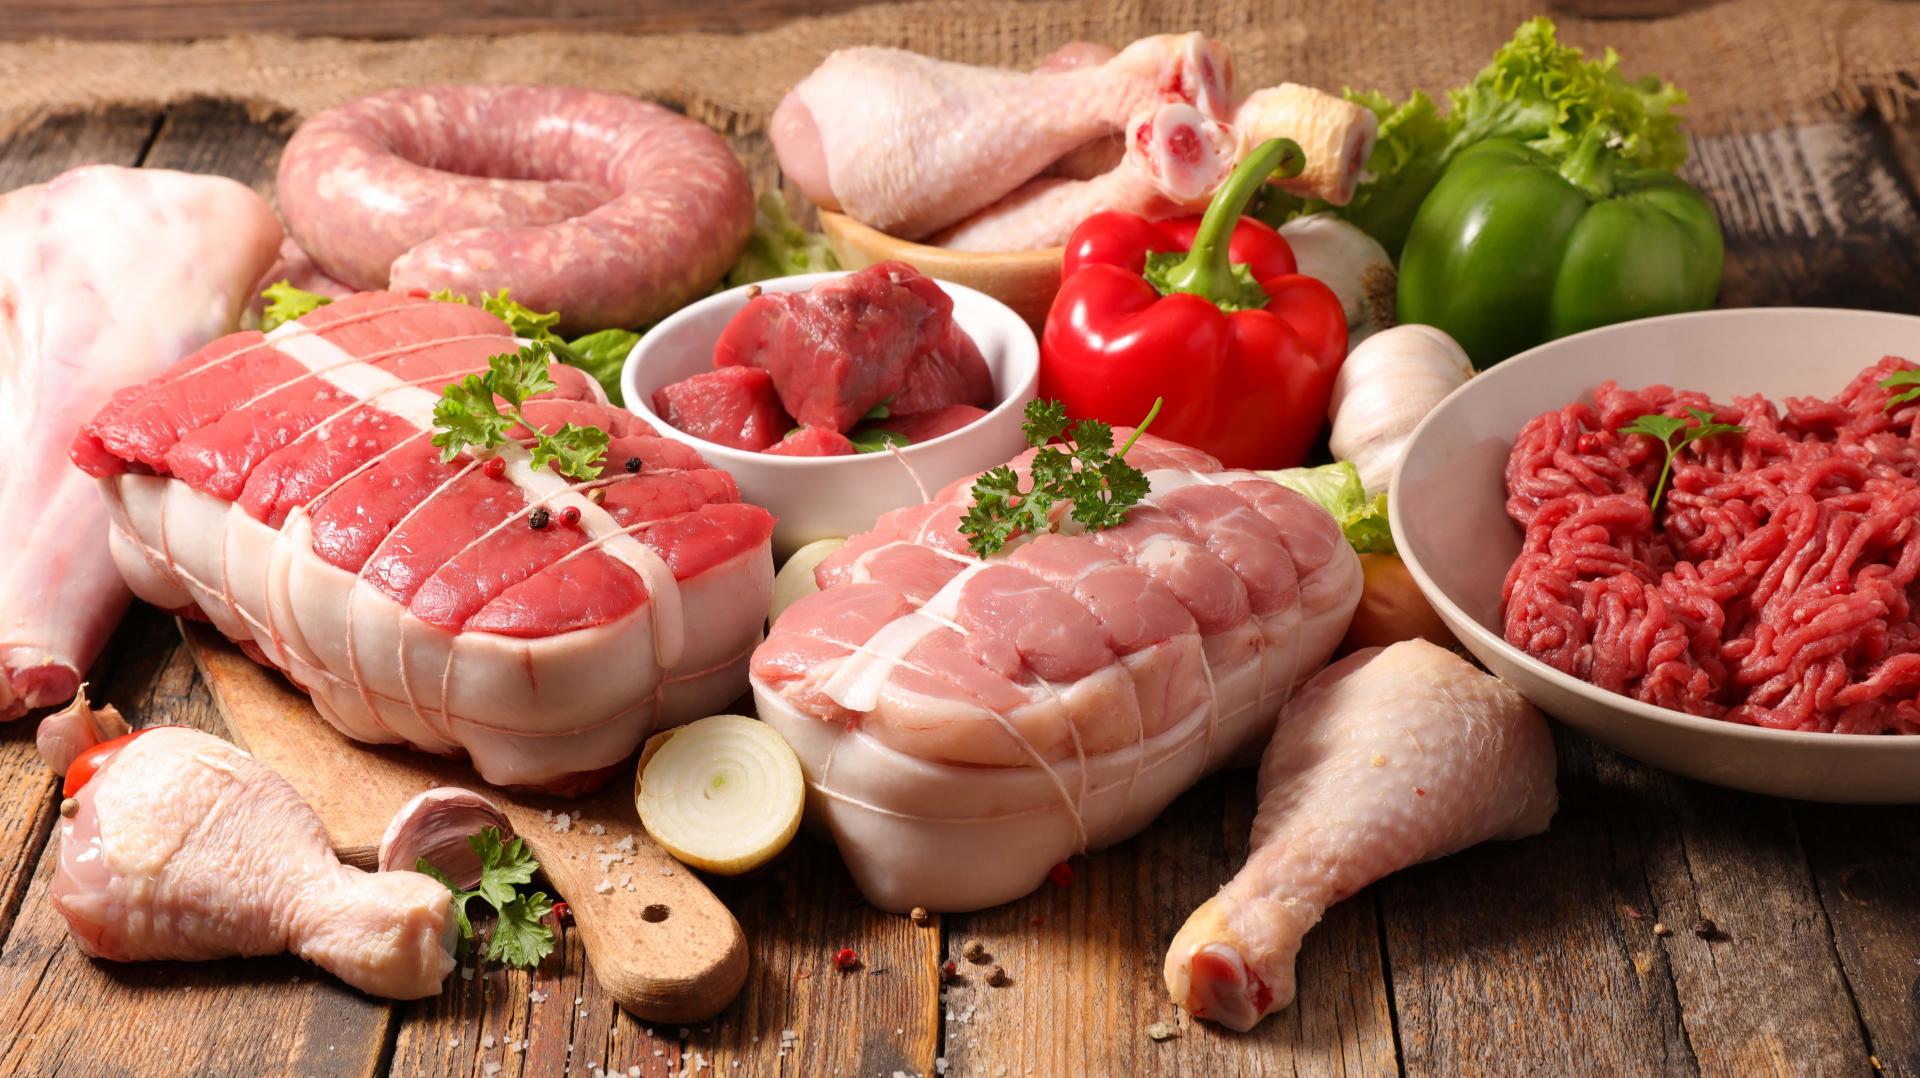 How to choose quality meat: expert advice